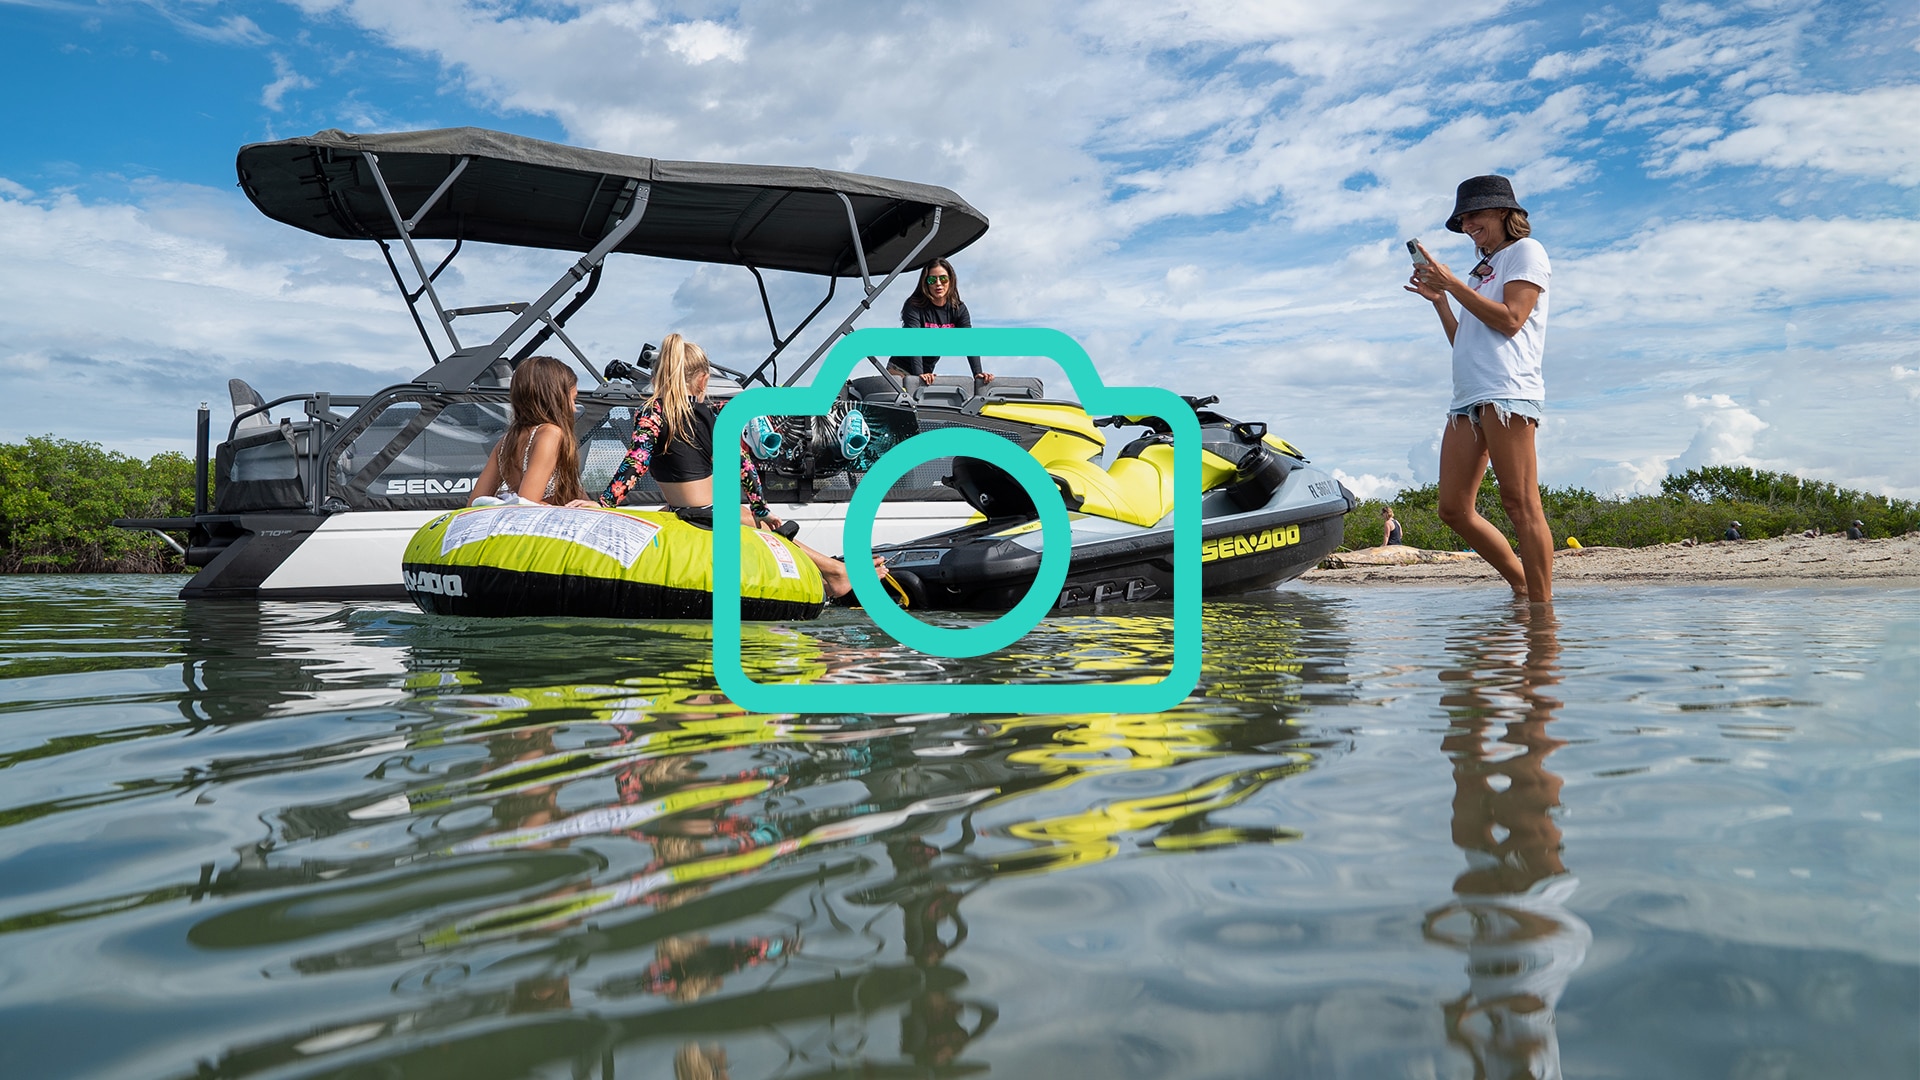 Capture content of you living the Sea-Doo Life